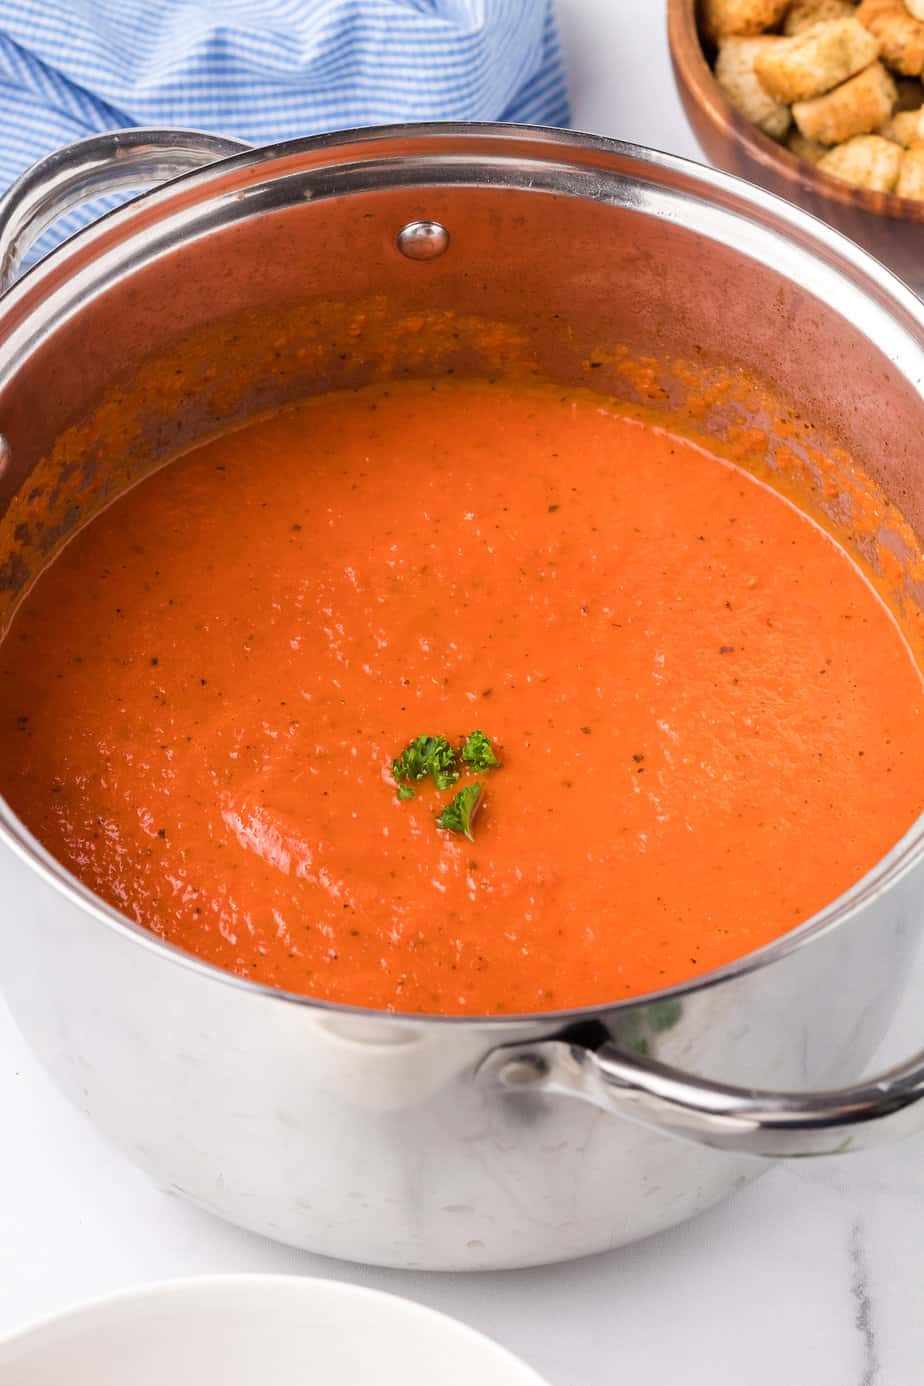 Creamy smooth tomato soup blended in a pot from the side.with a napkin and bowl edges nearby on the counter.